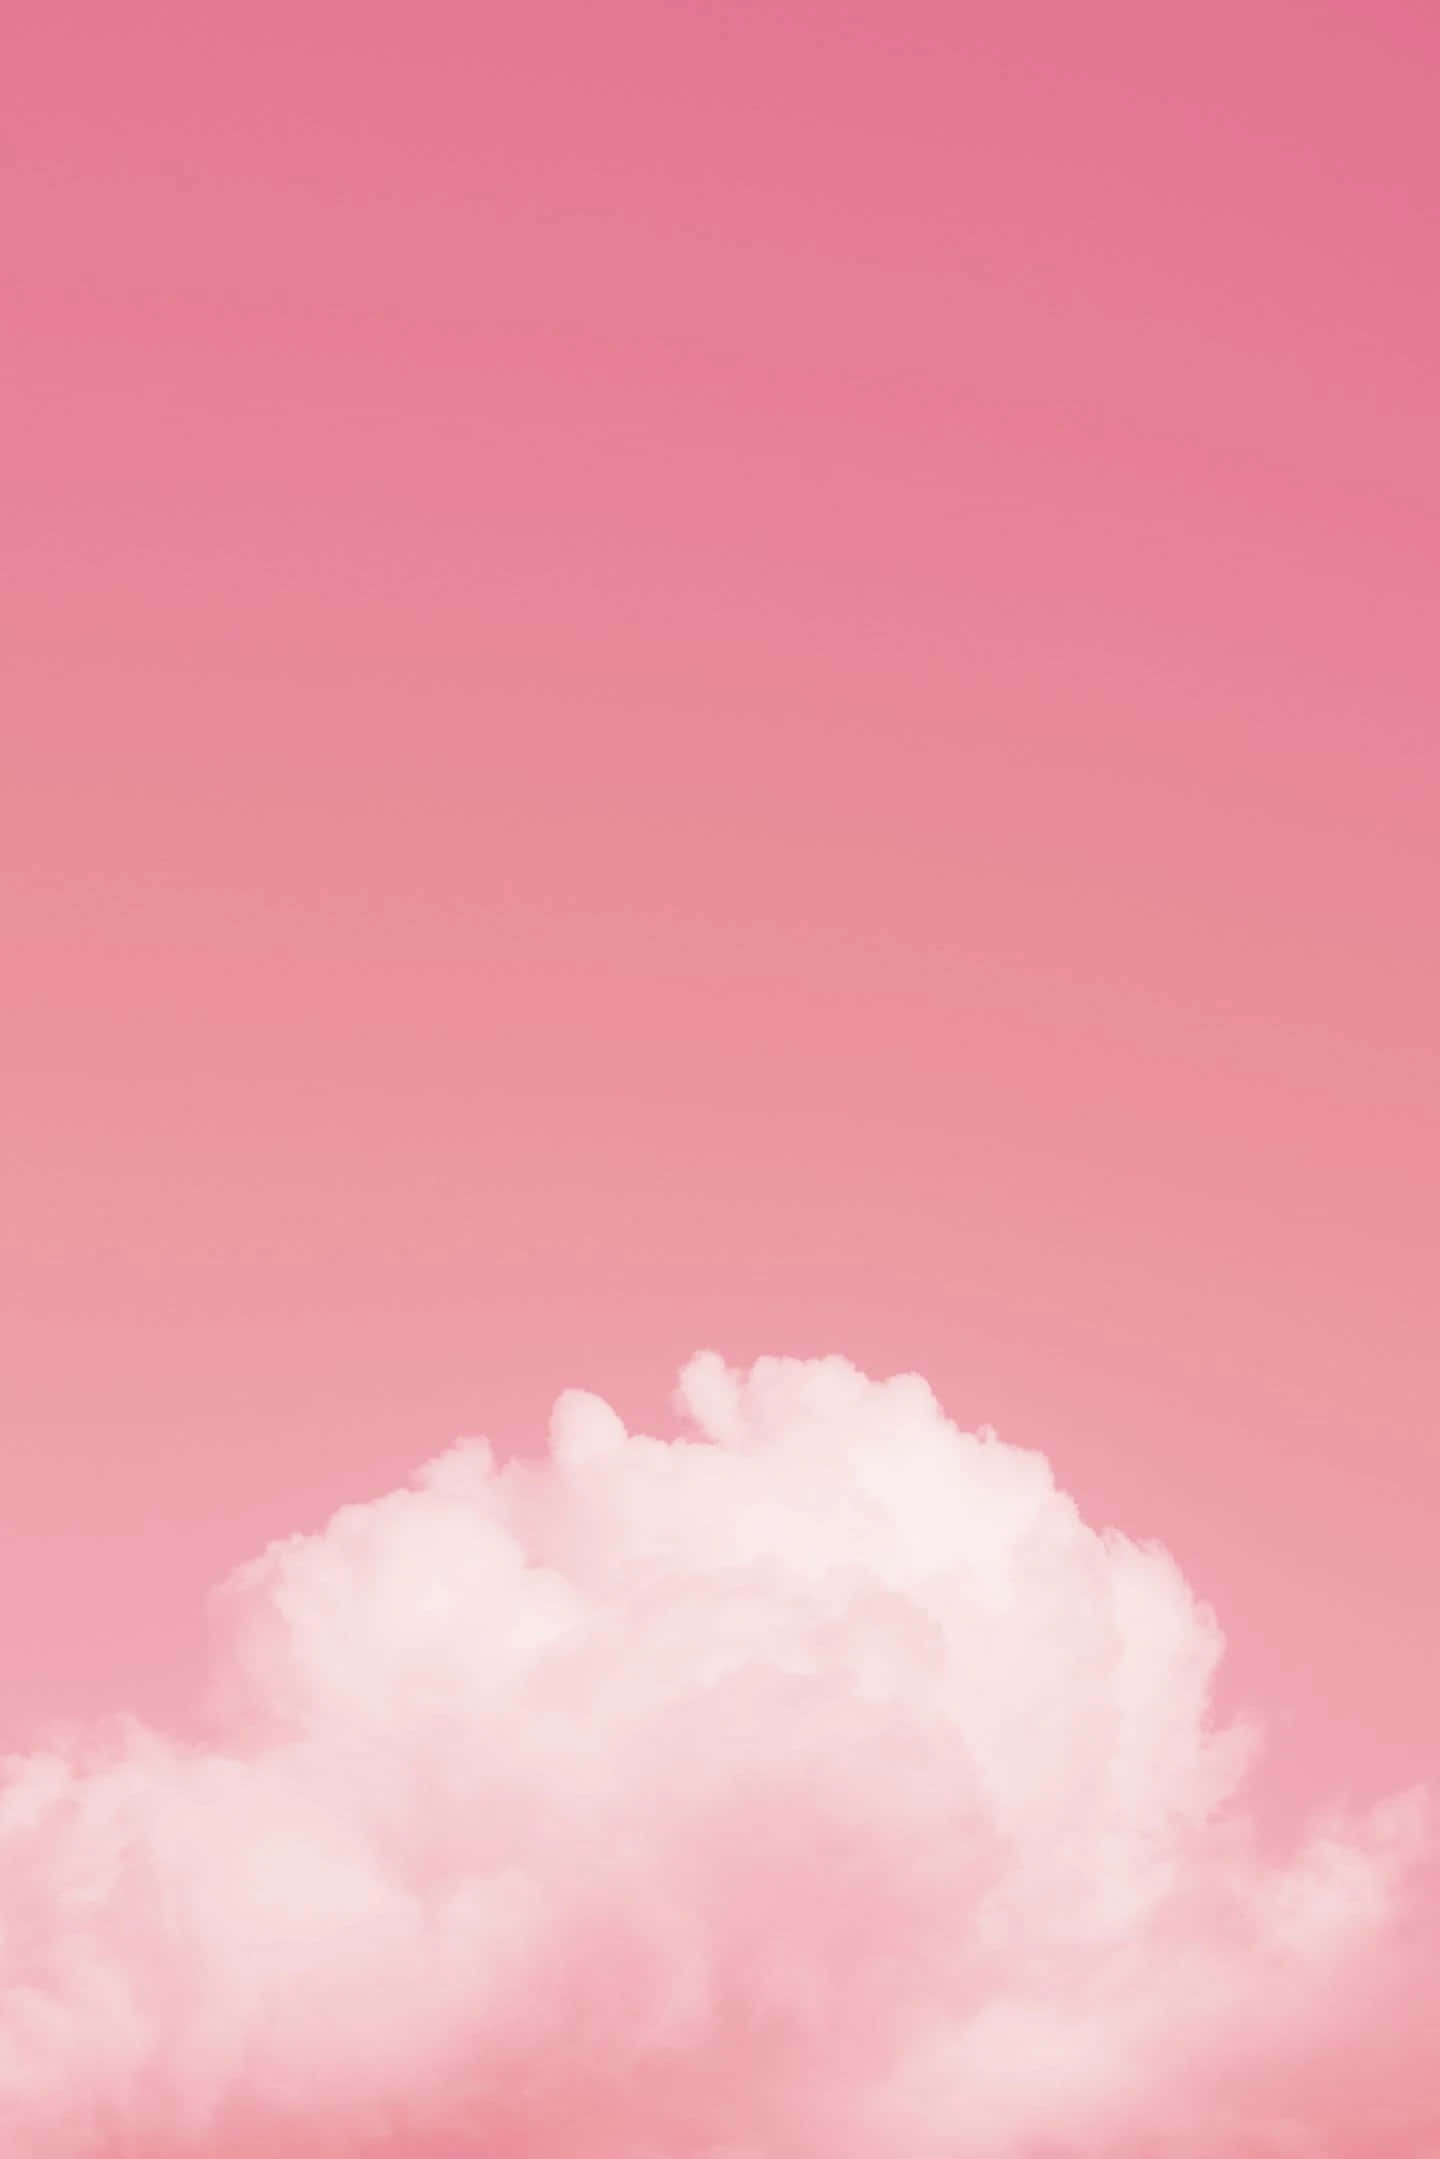 "Let the beauty of pink take over your desktop"